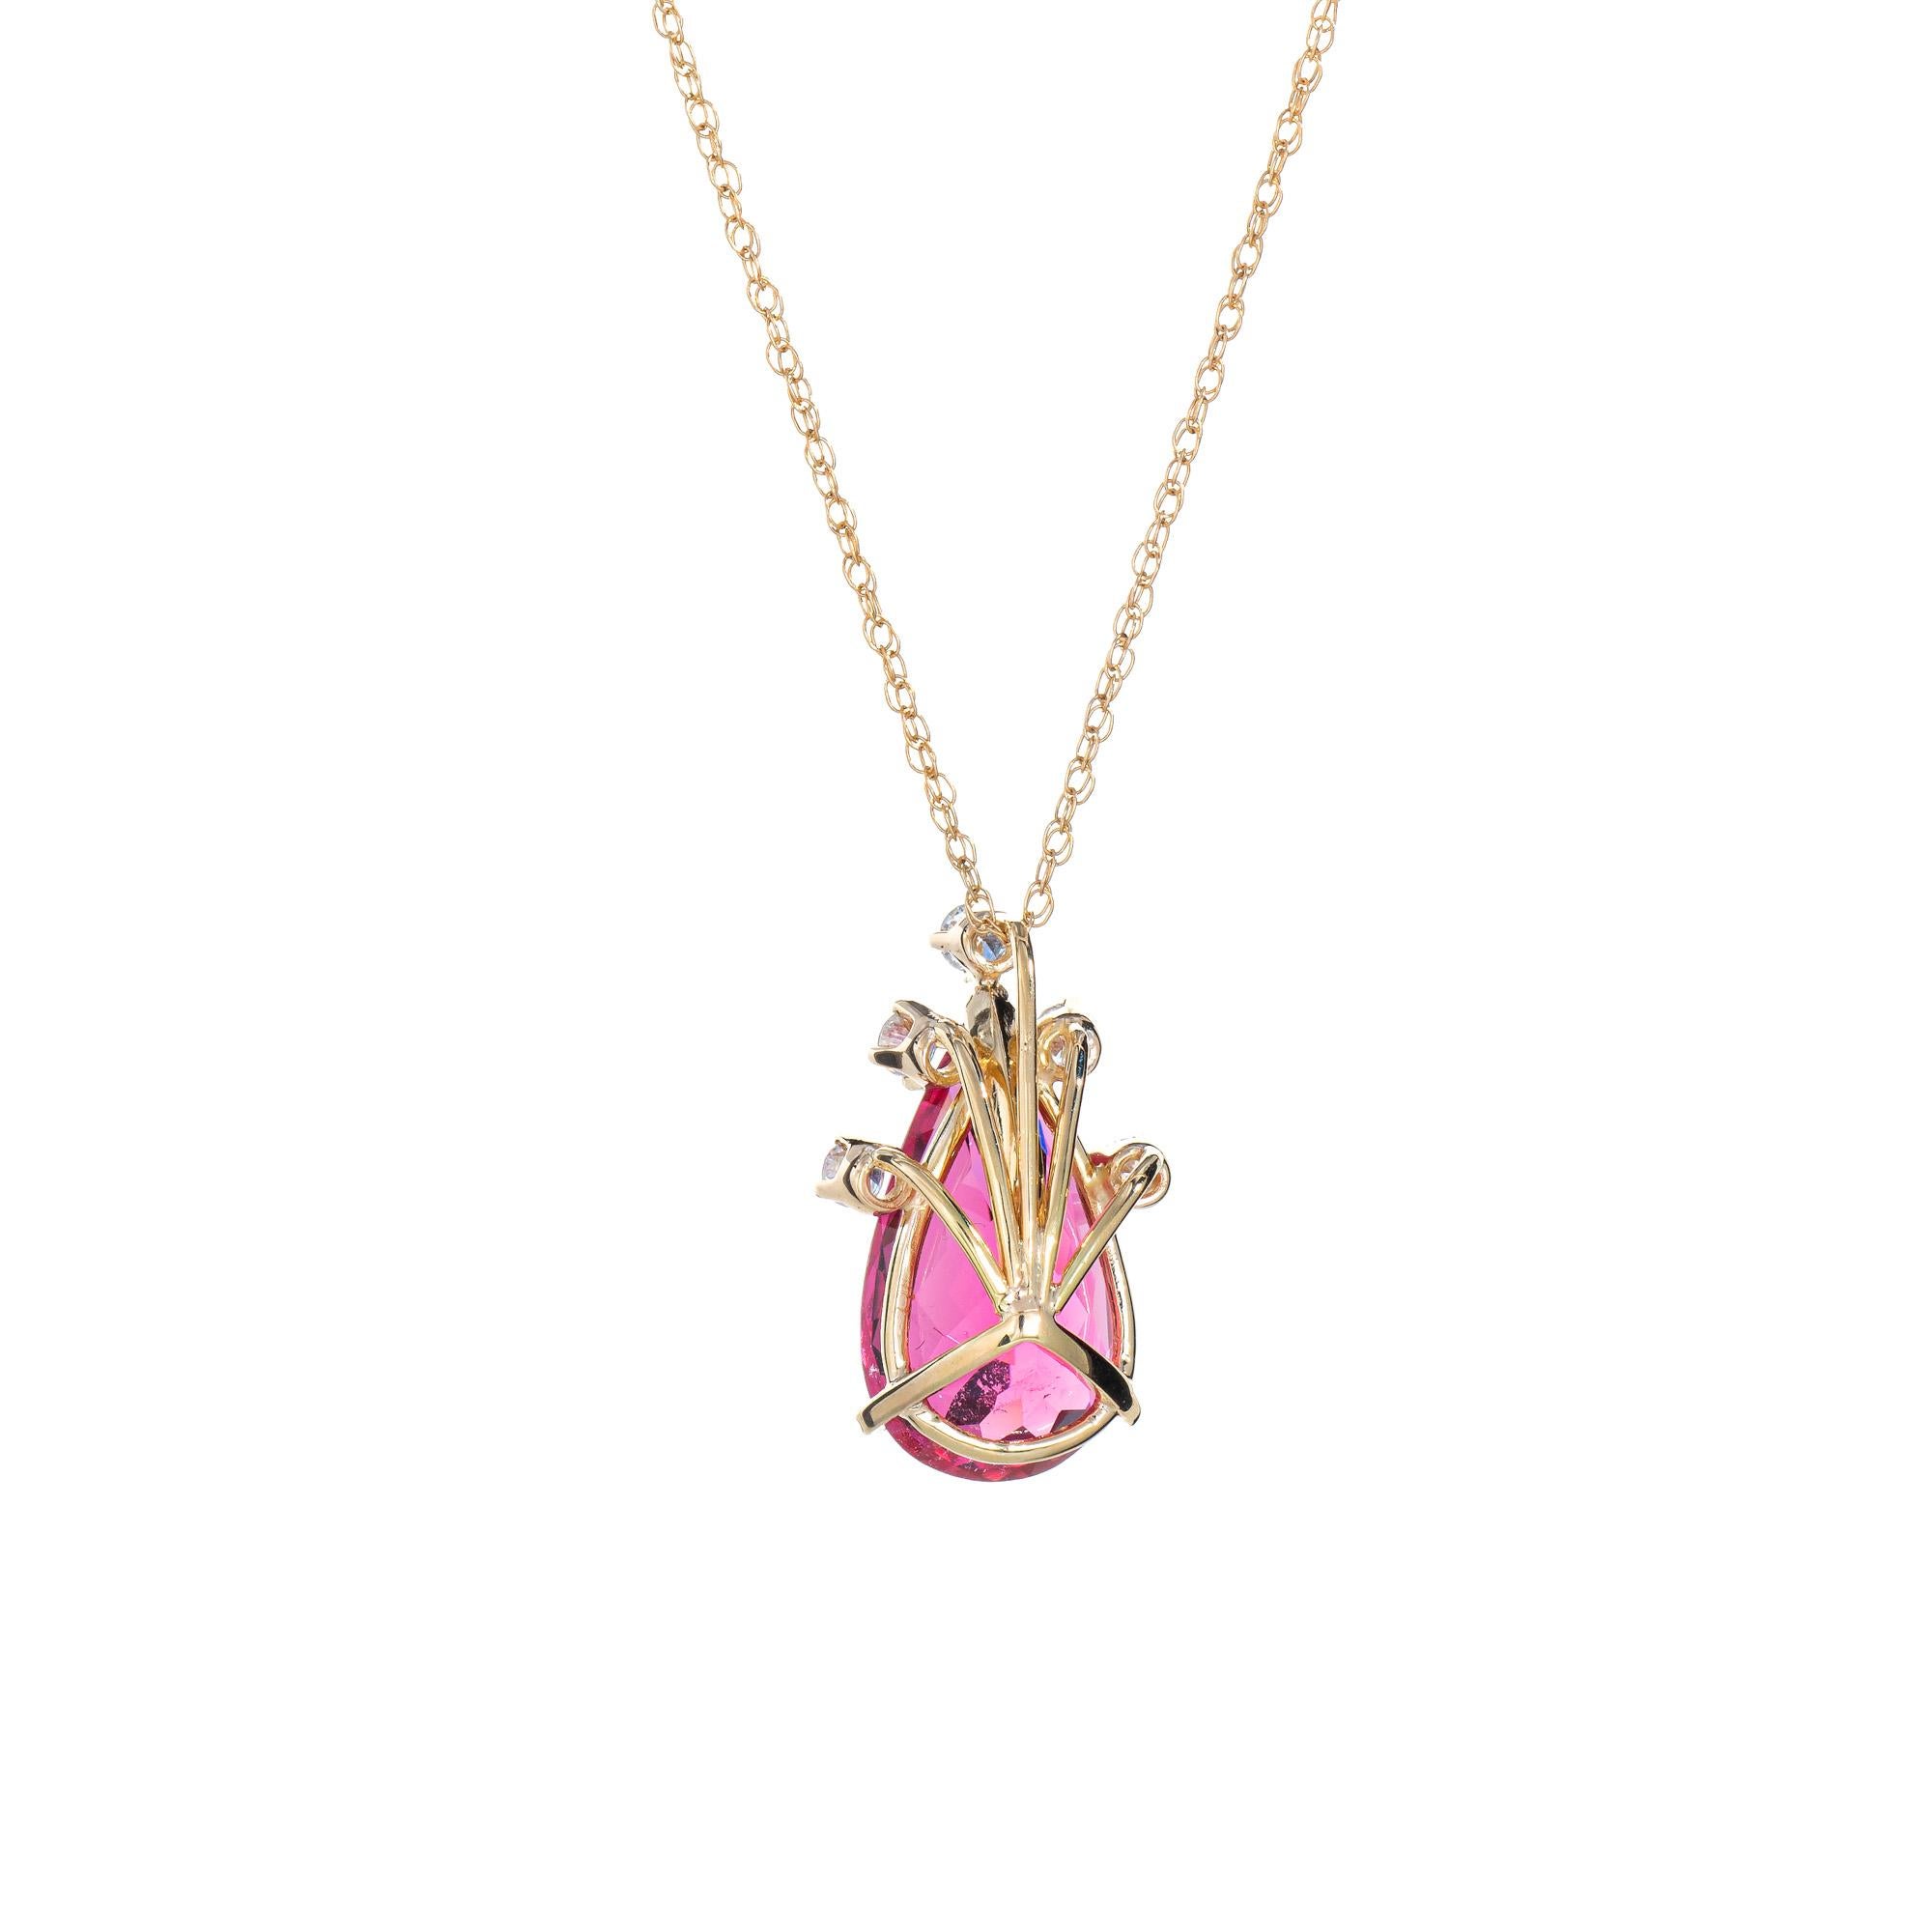 Stylish and finely detailed fushia pink tourmaline & diamond pendant + necklace crafted in 18 karat yellow gold (pendant) and 14k yellow gold (chain).

The pink tourmaline measures 17.0 x 9.4 x 7.3mm (estimated at 7.20 carats). The tourmaline is a